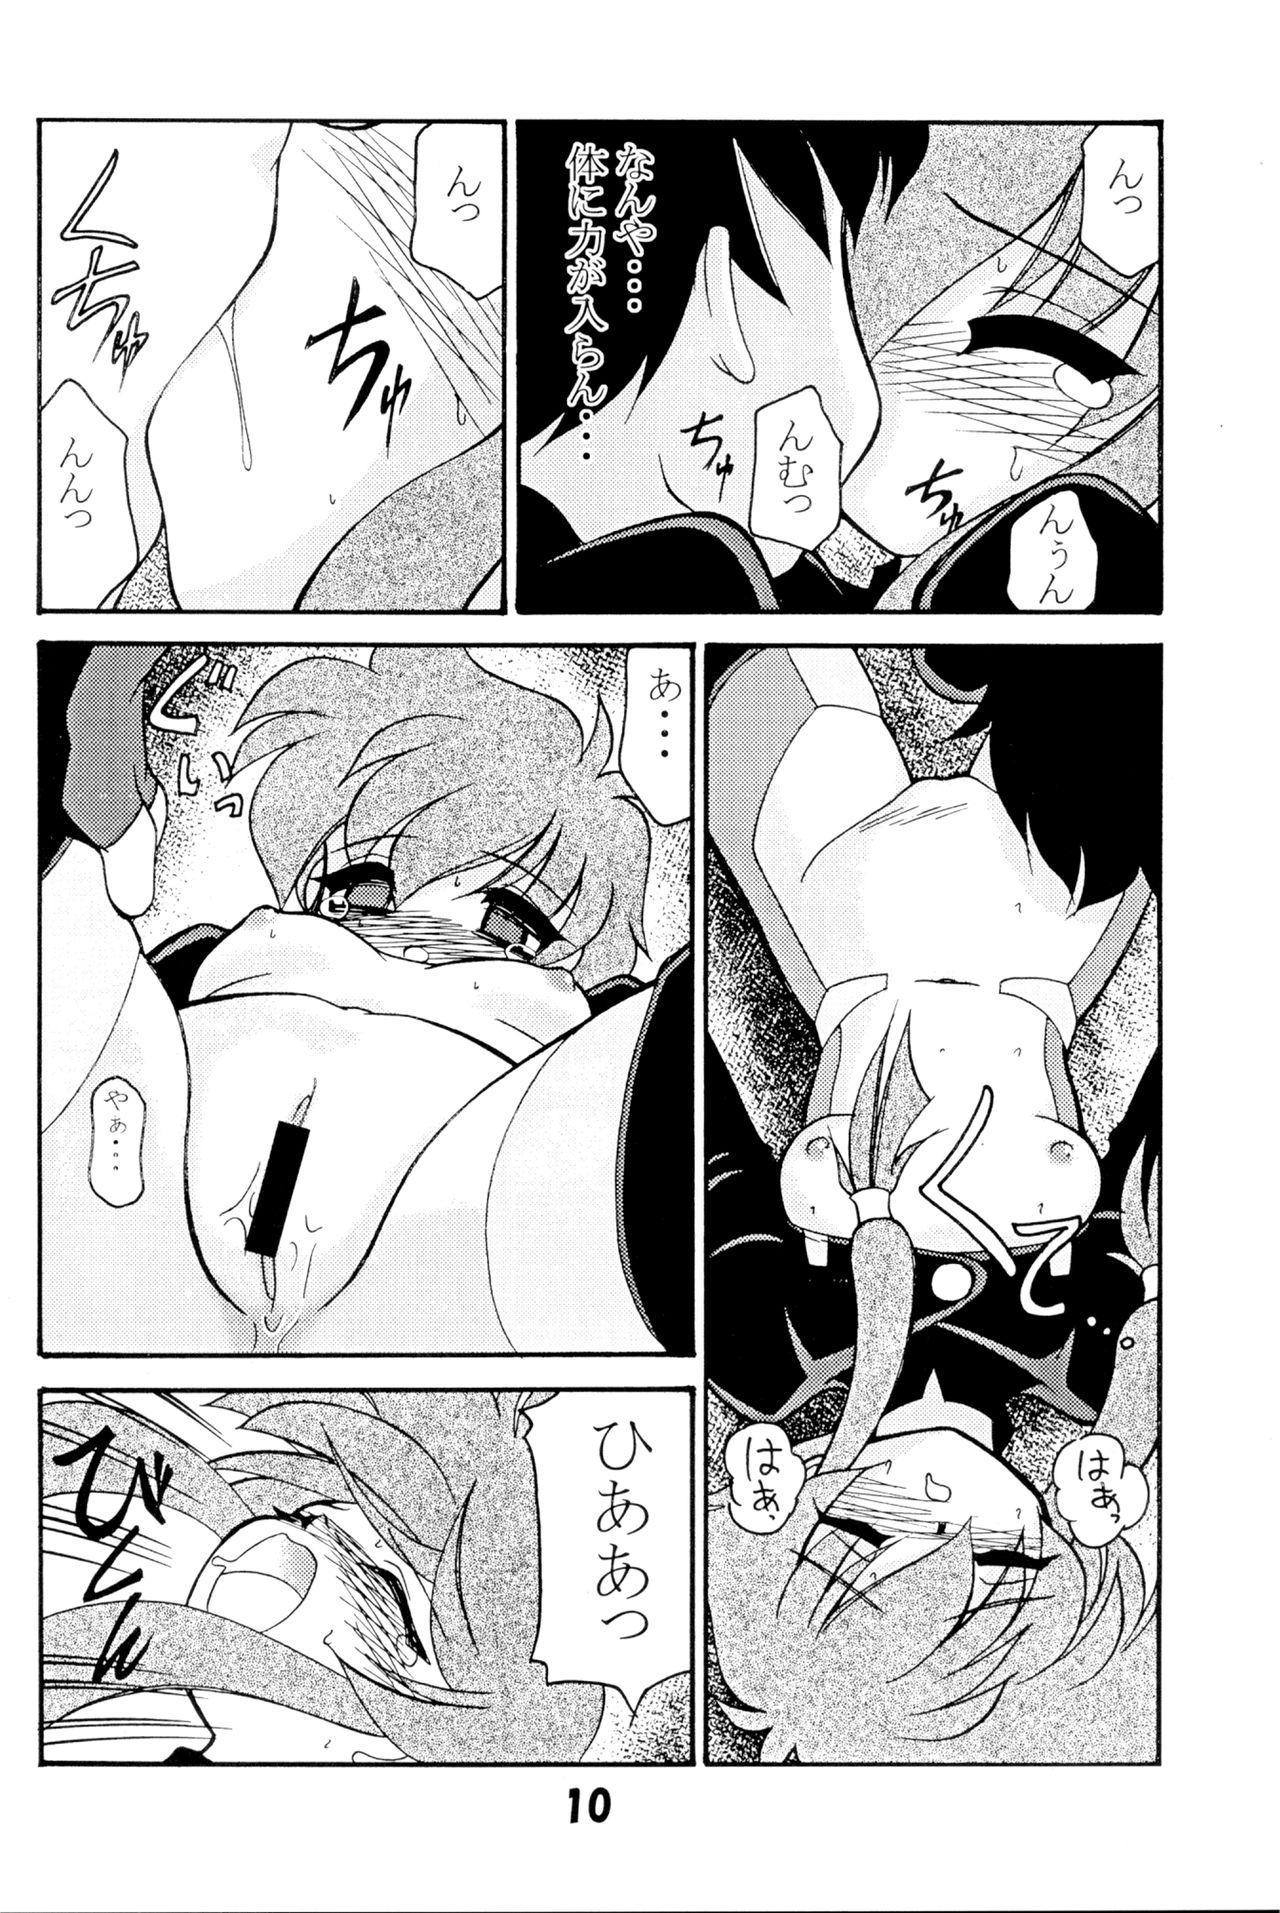 Rimming VERSUS - Magic knight rayearth Angelic layer Aussie - Page 9